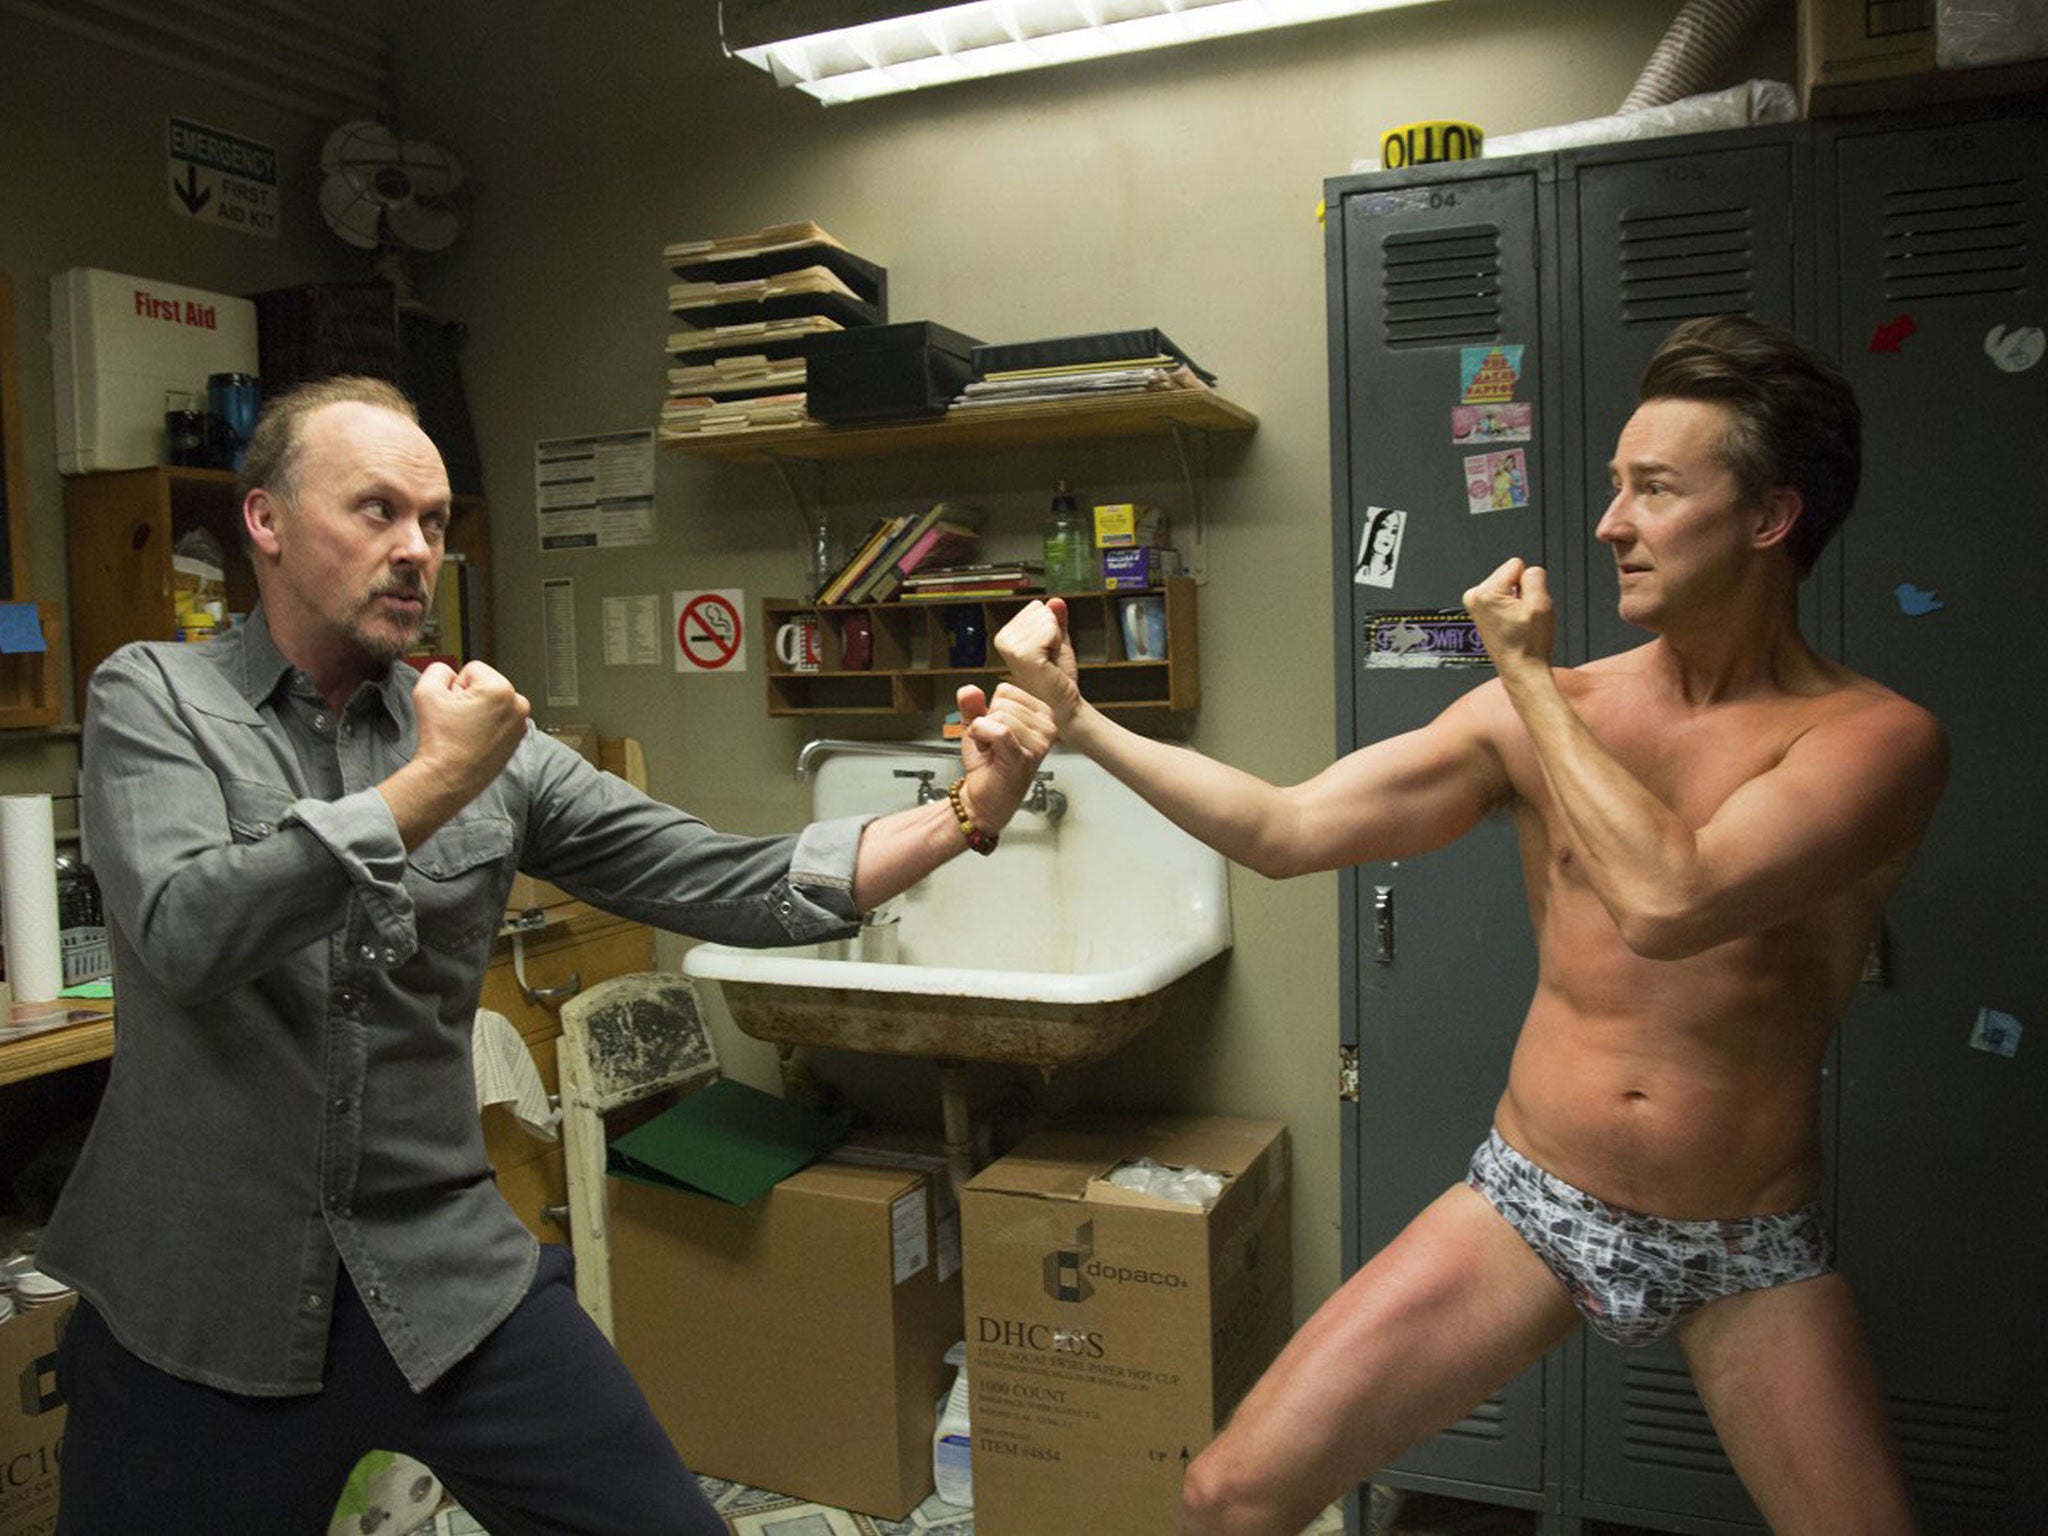 Golden Globes 2015 List Of Nominations In Full As Birdman Leads Images, Photos, Reviews